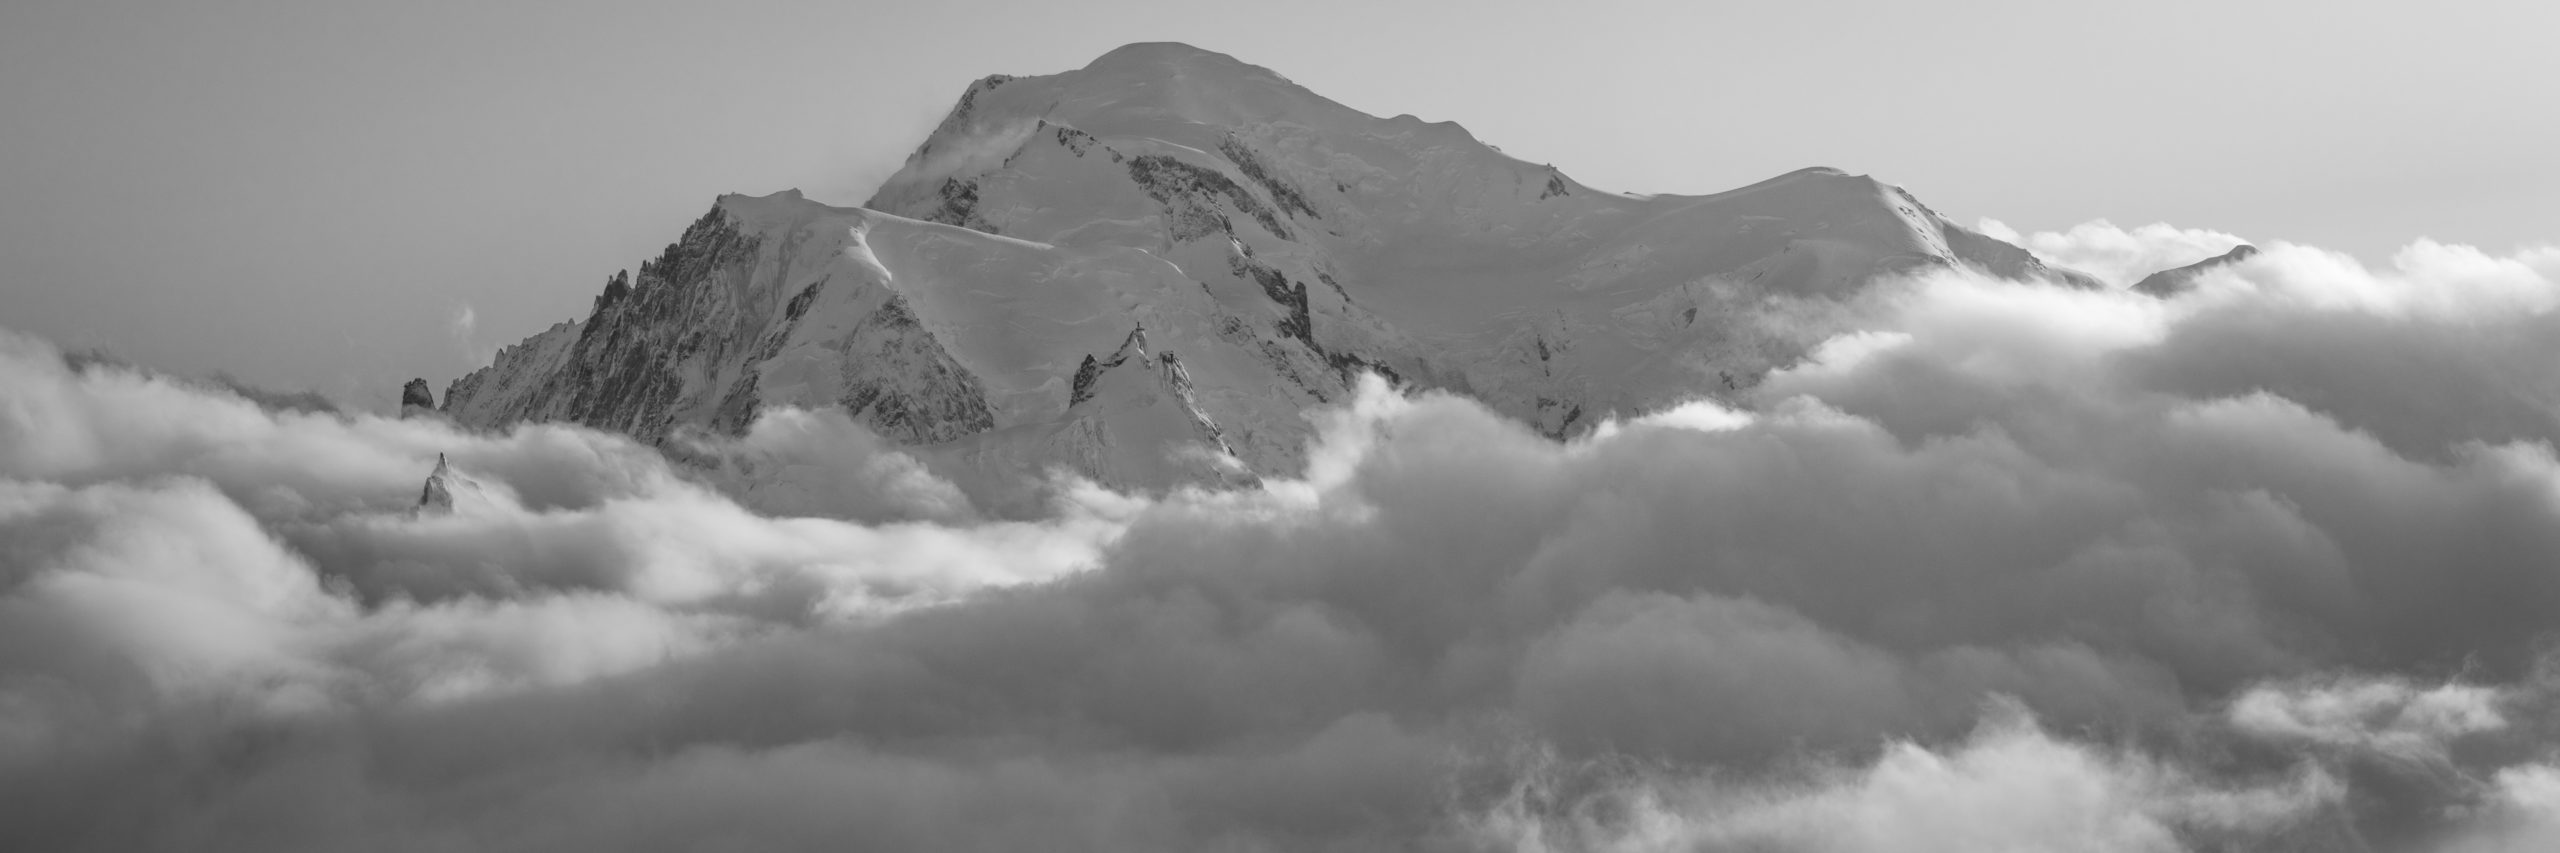 Mont-Blanc massif above the clouds: photography